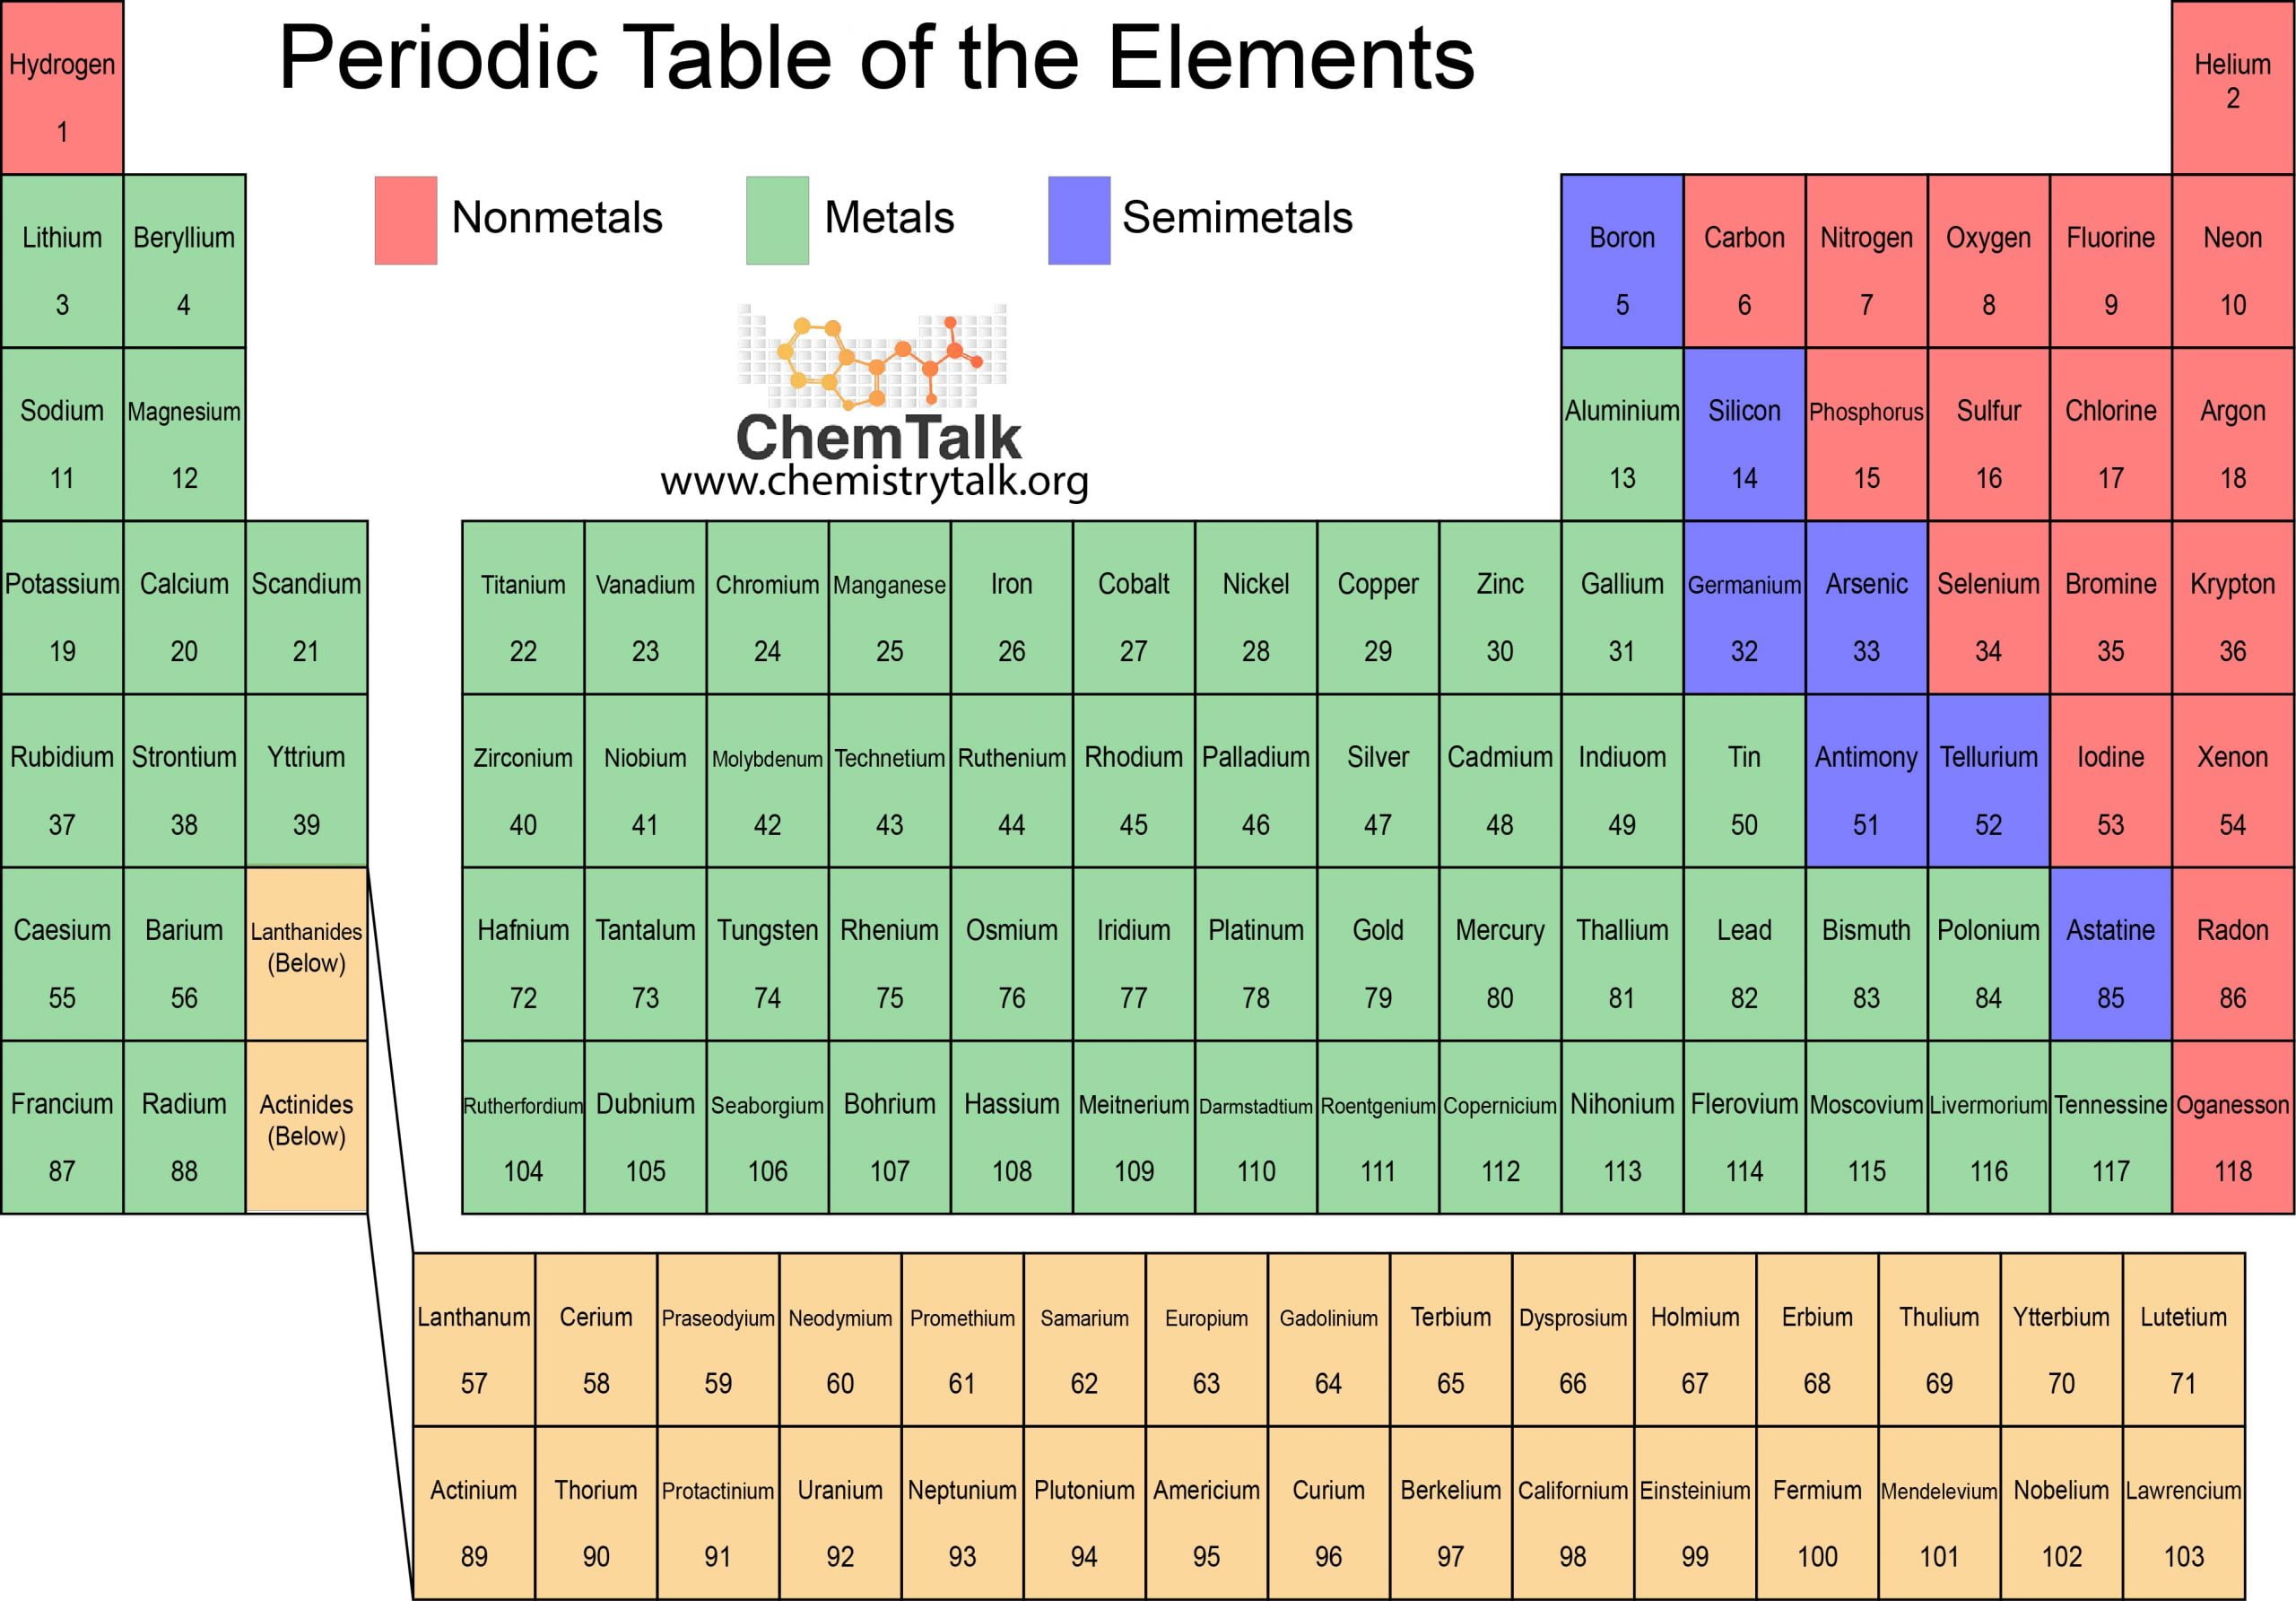 periodic table with ionic charges for transition metals